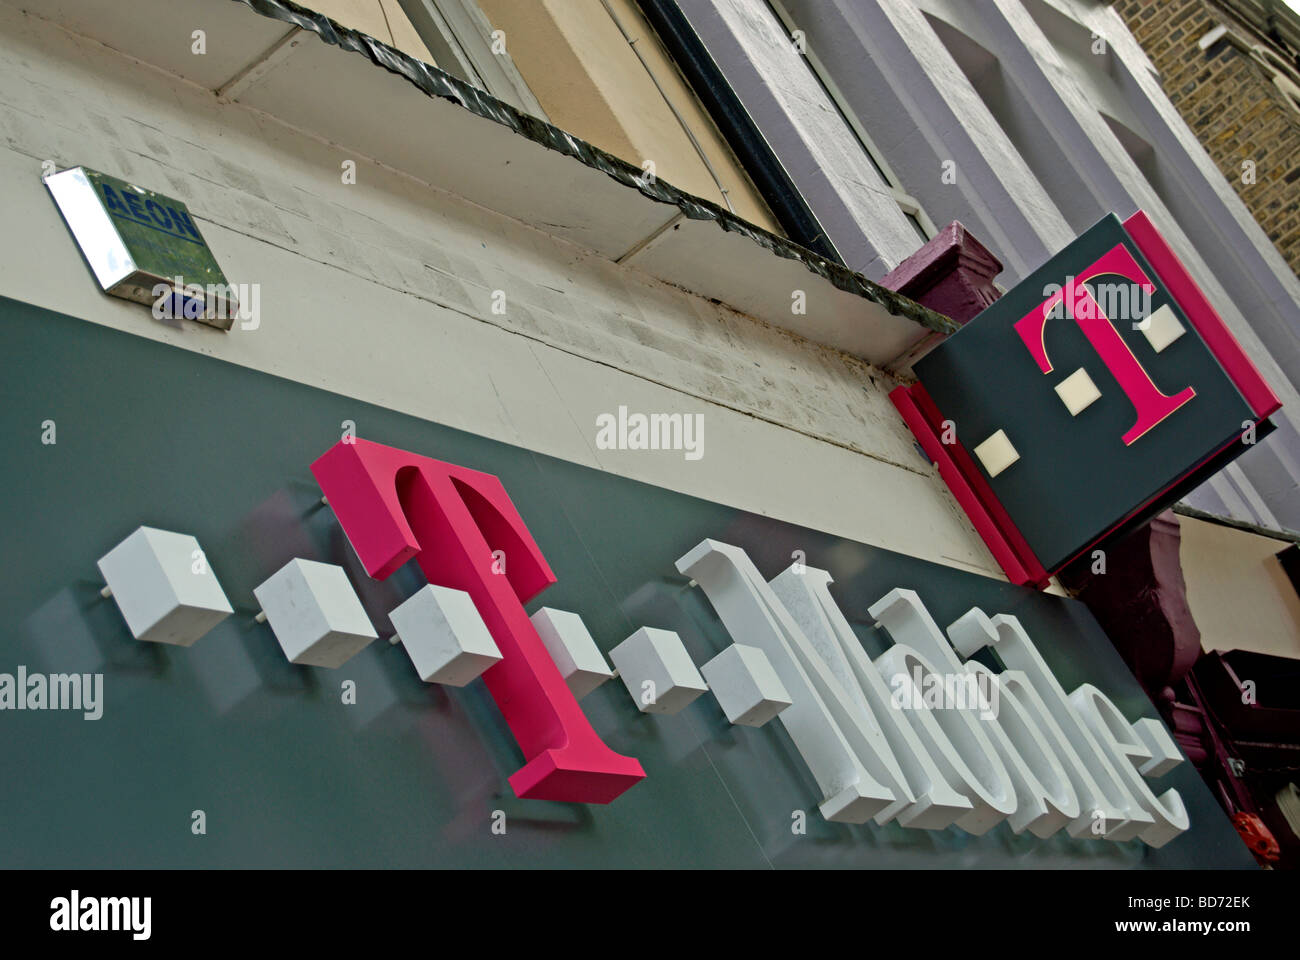 name and logo of mobile phone retailer t mobile in chiswick high road, west london, england Stock Photo